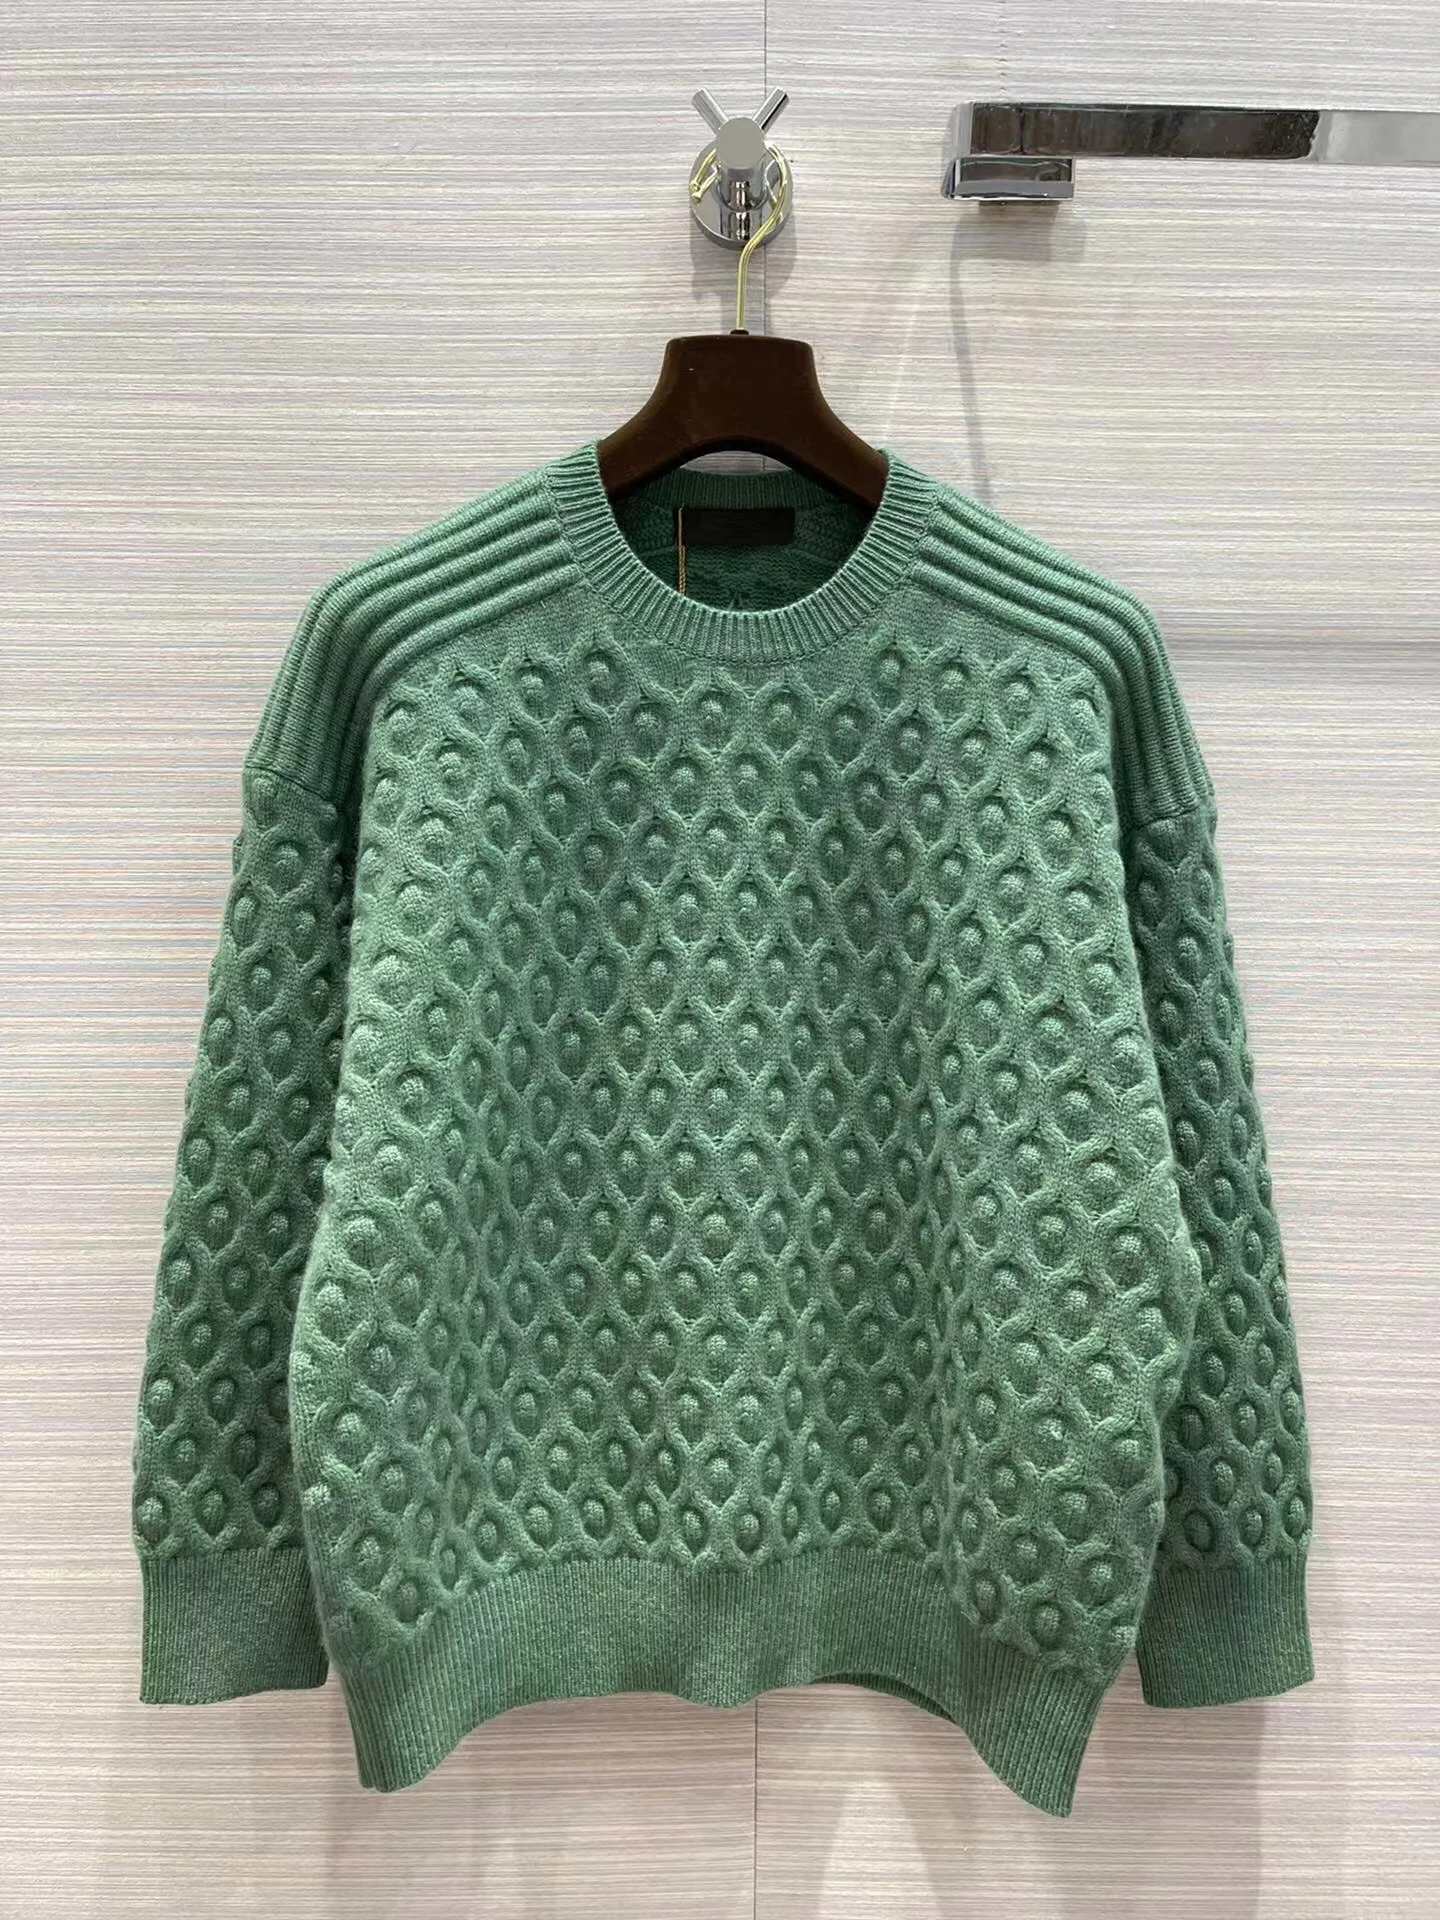 2021 Winter Green Sweater Women Knitted Casual Clothes High Quality 100% Cashmere Loose Pullover